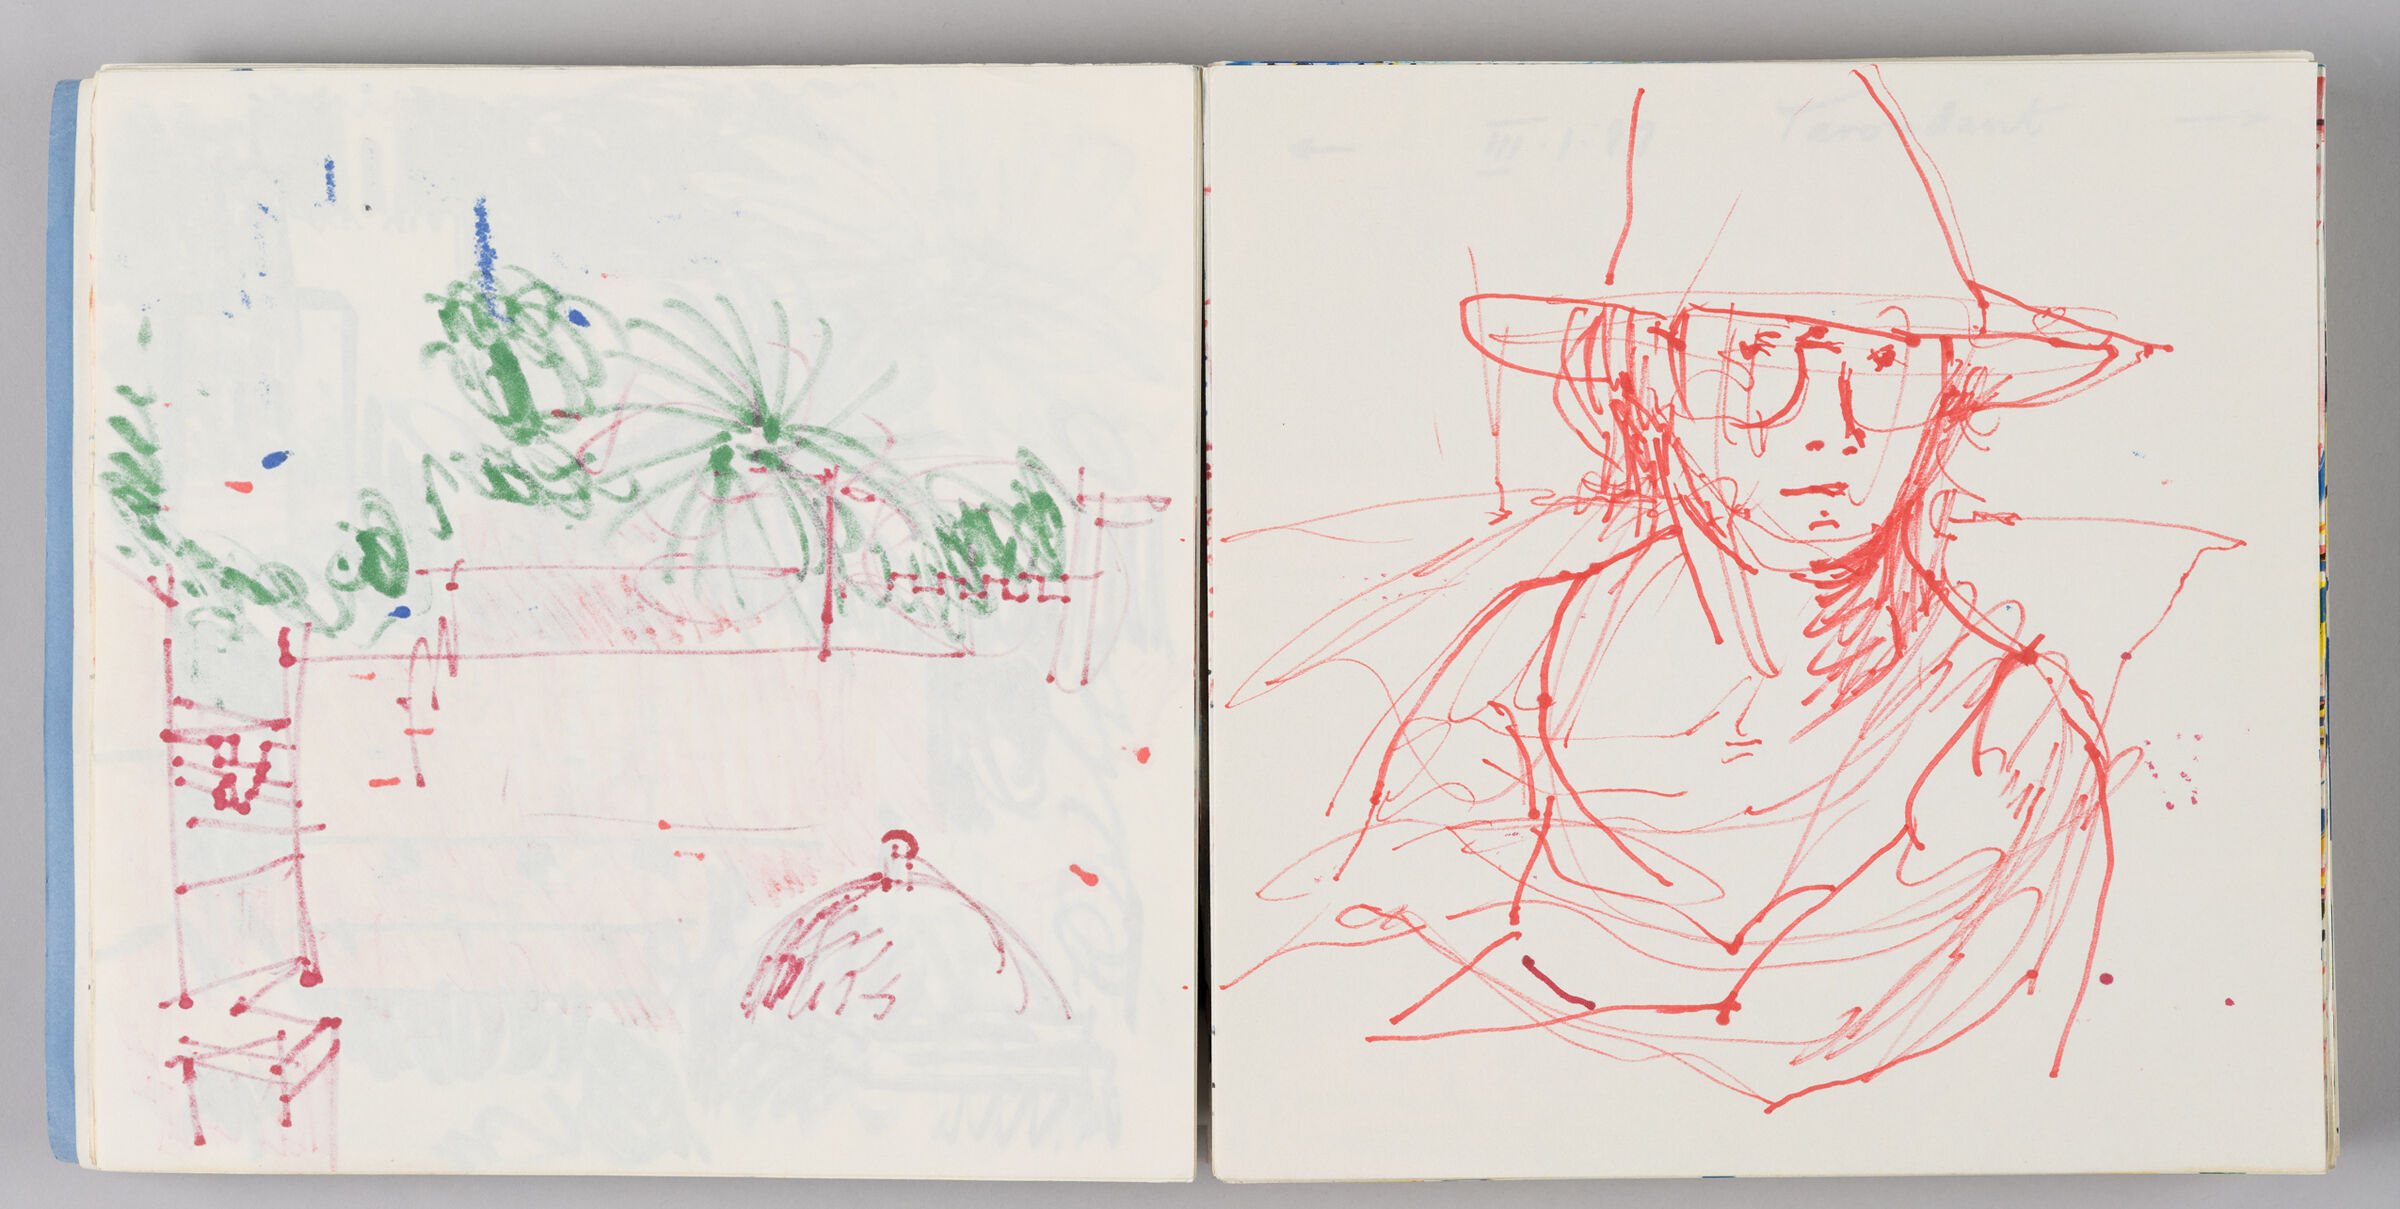 Untitled (Bleed-Through Of Previous Page, Left Page); Untitled (Portrait Of Female Figure [Elizabeth] In A Hat, Right Page)
